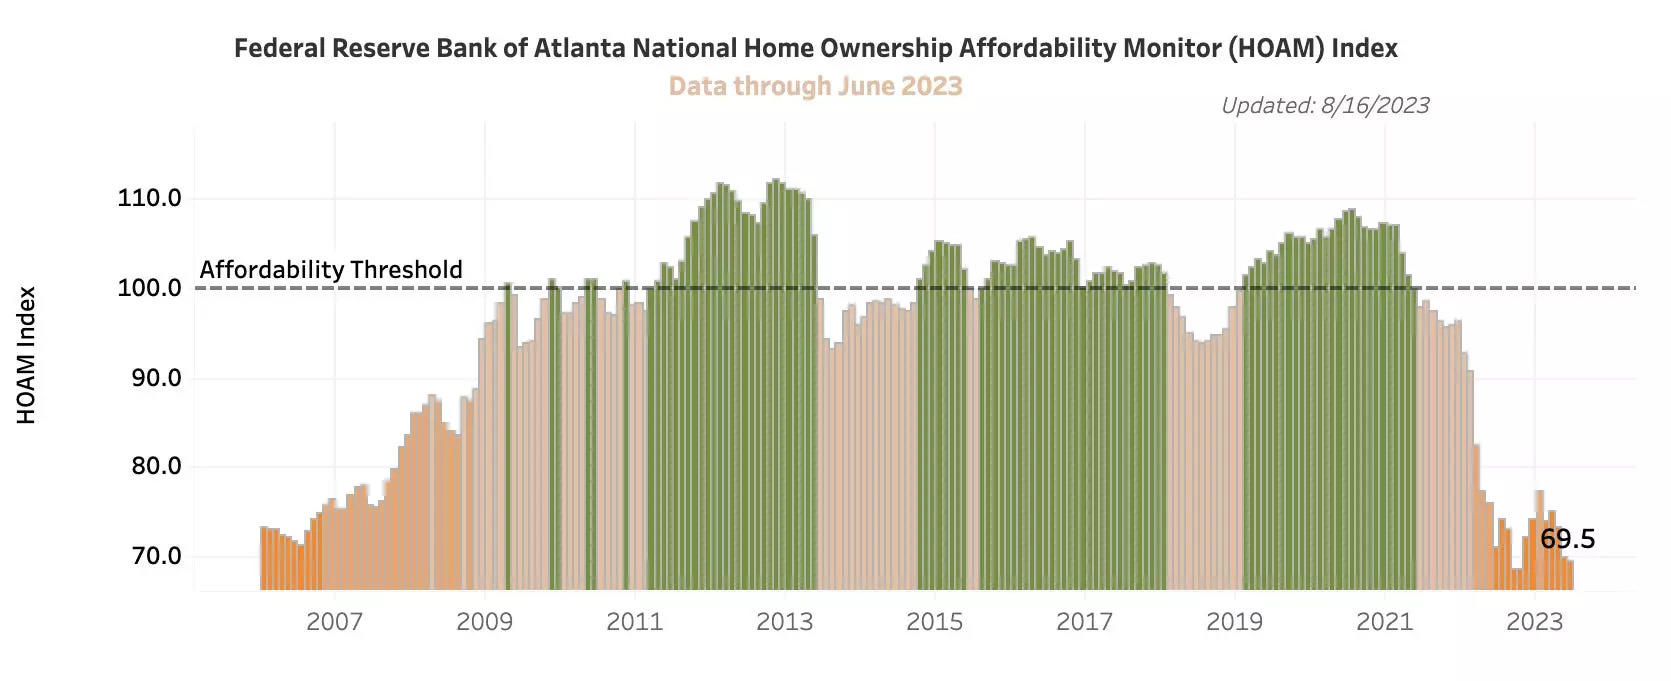 Home affordability is the worst its been since the housing bubble prior to the 2008 subprime mortgage crisis.